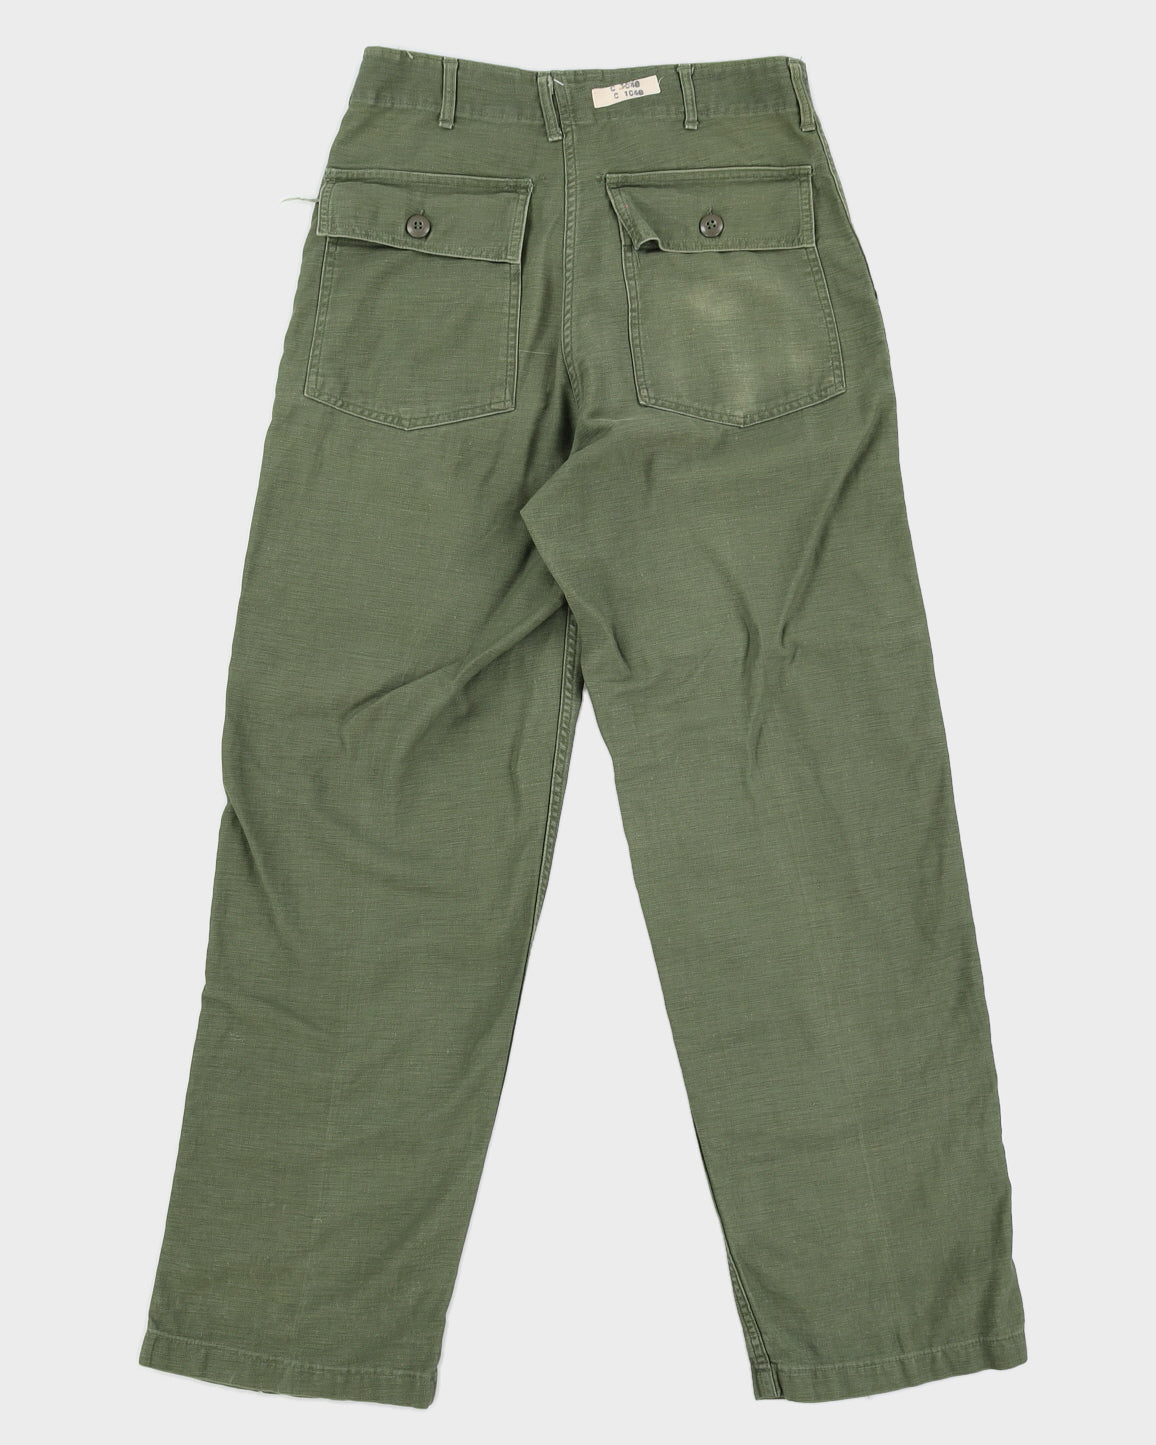 60s US Army OG-107 Sateen Trousers - 30x31